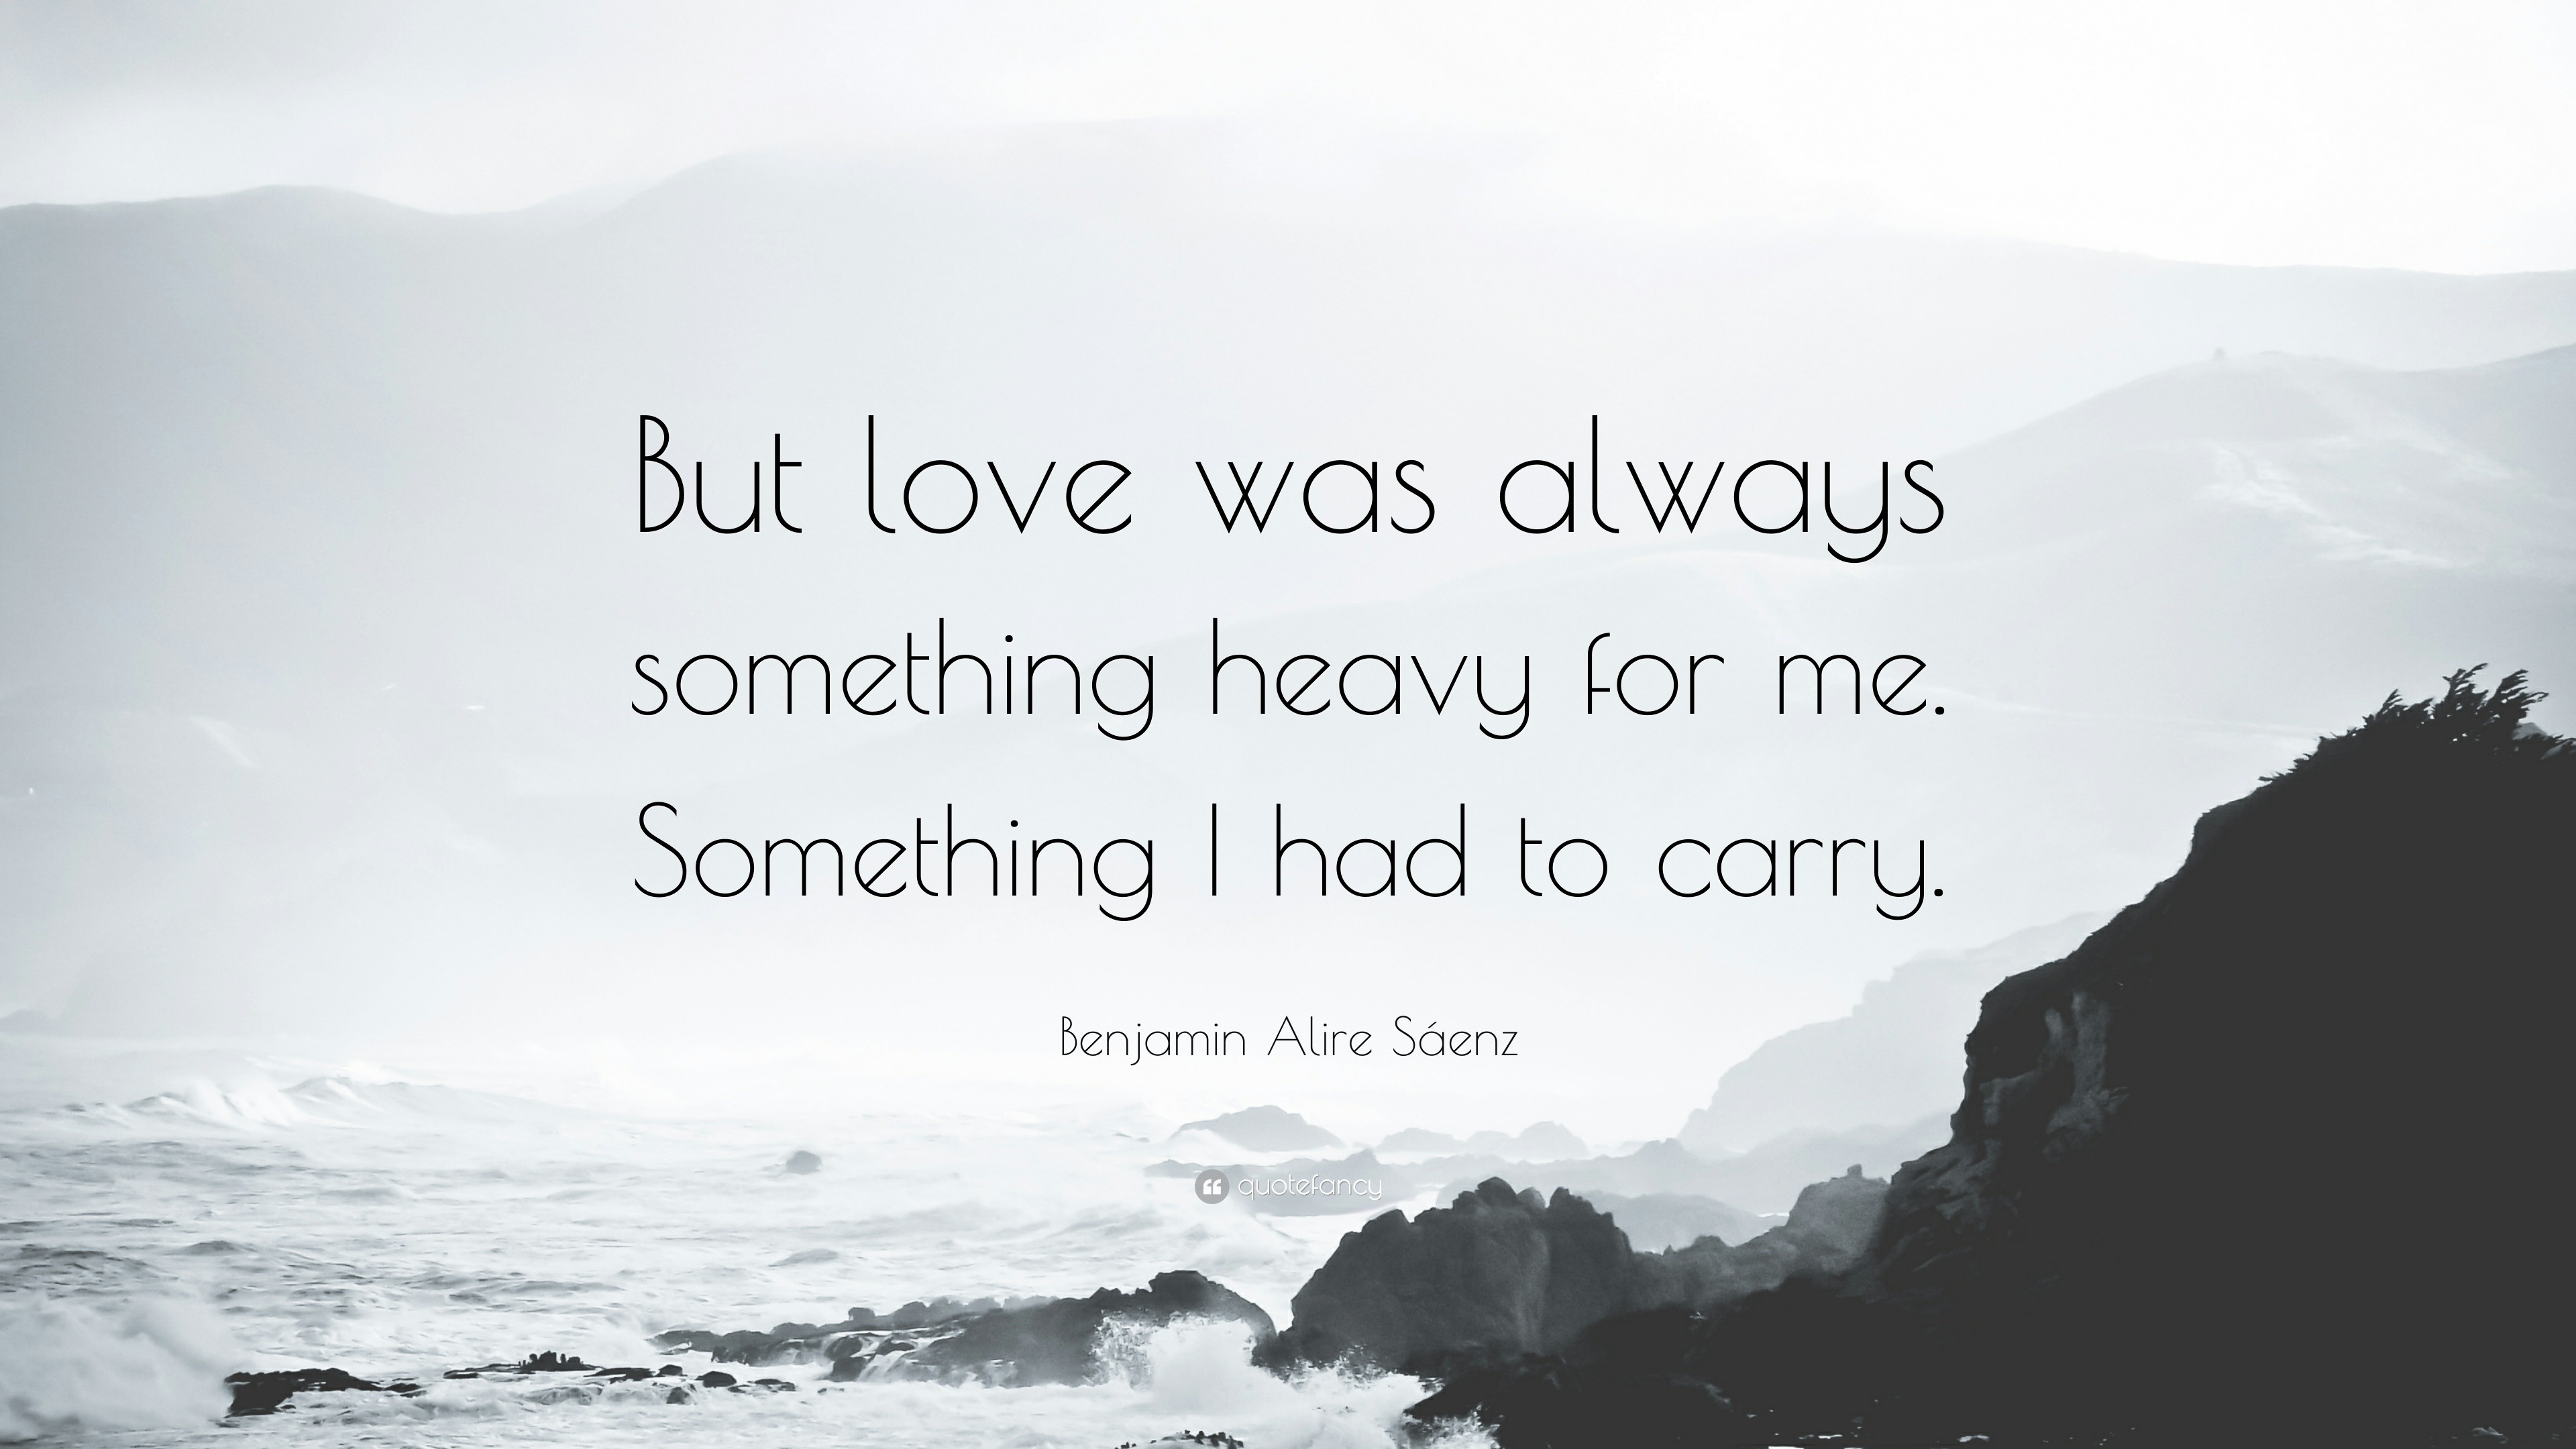 Benjamin Alire Sáenz Quote: “But love was always something heavy for me ...